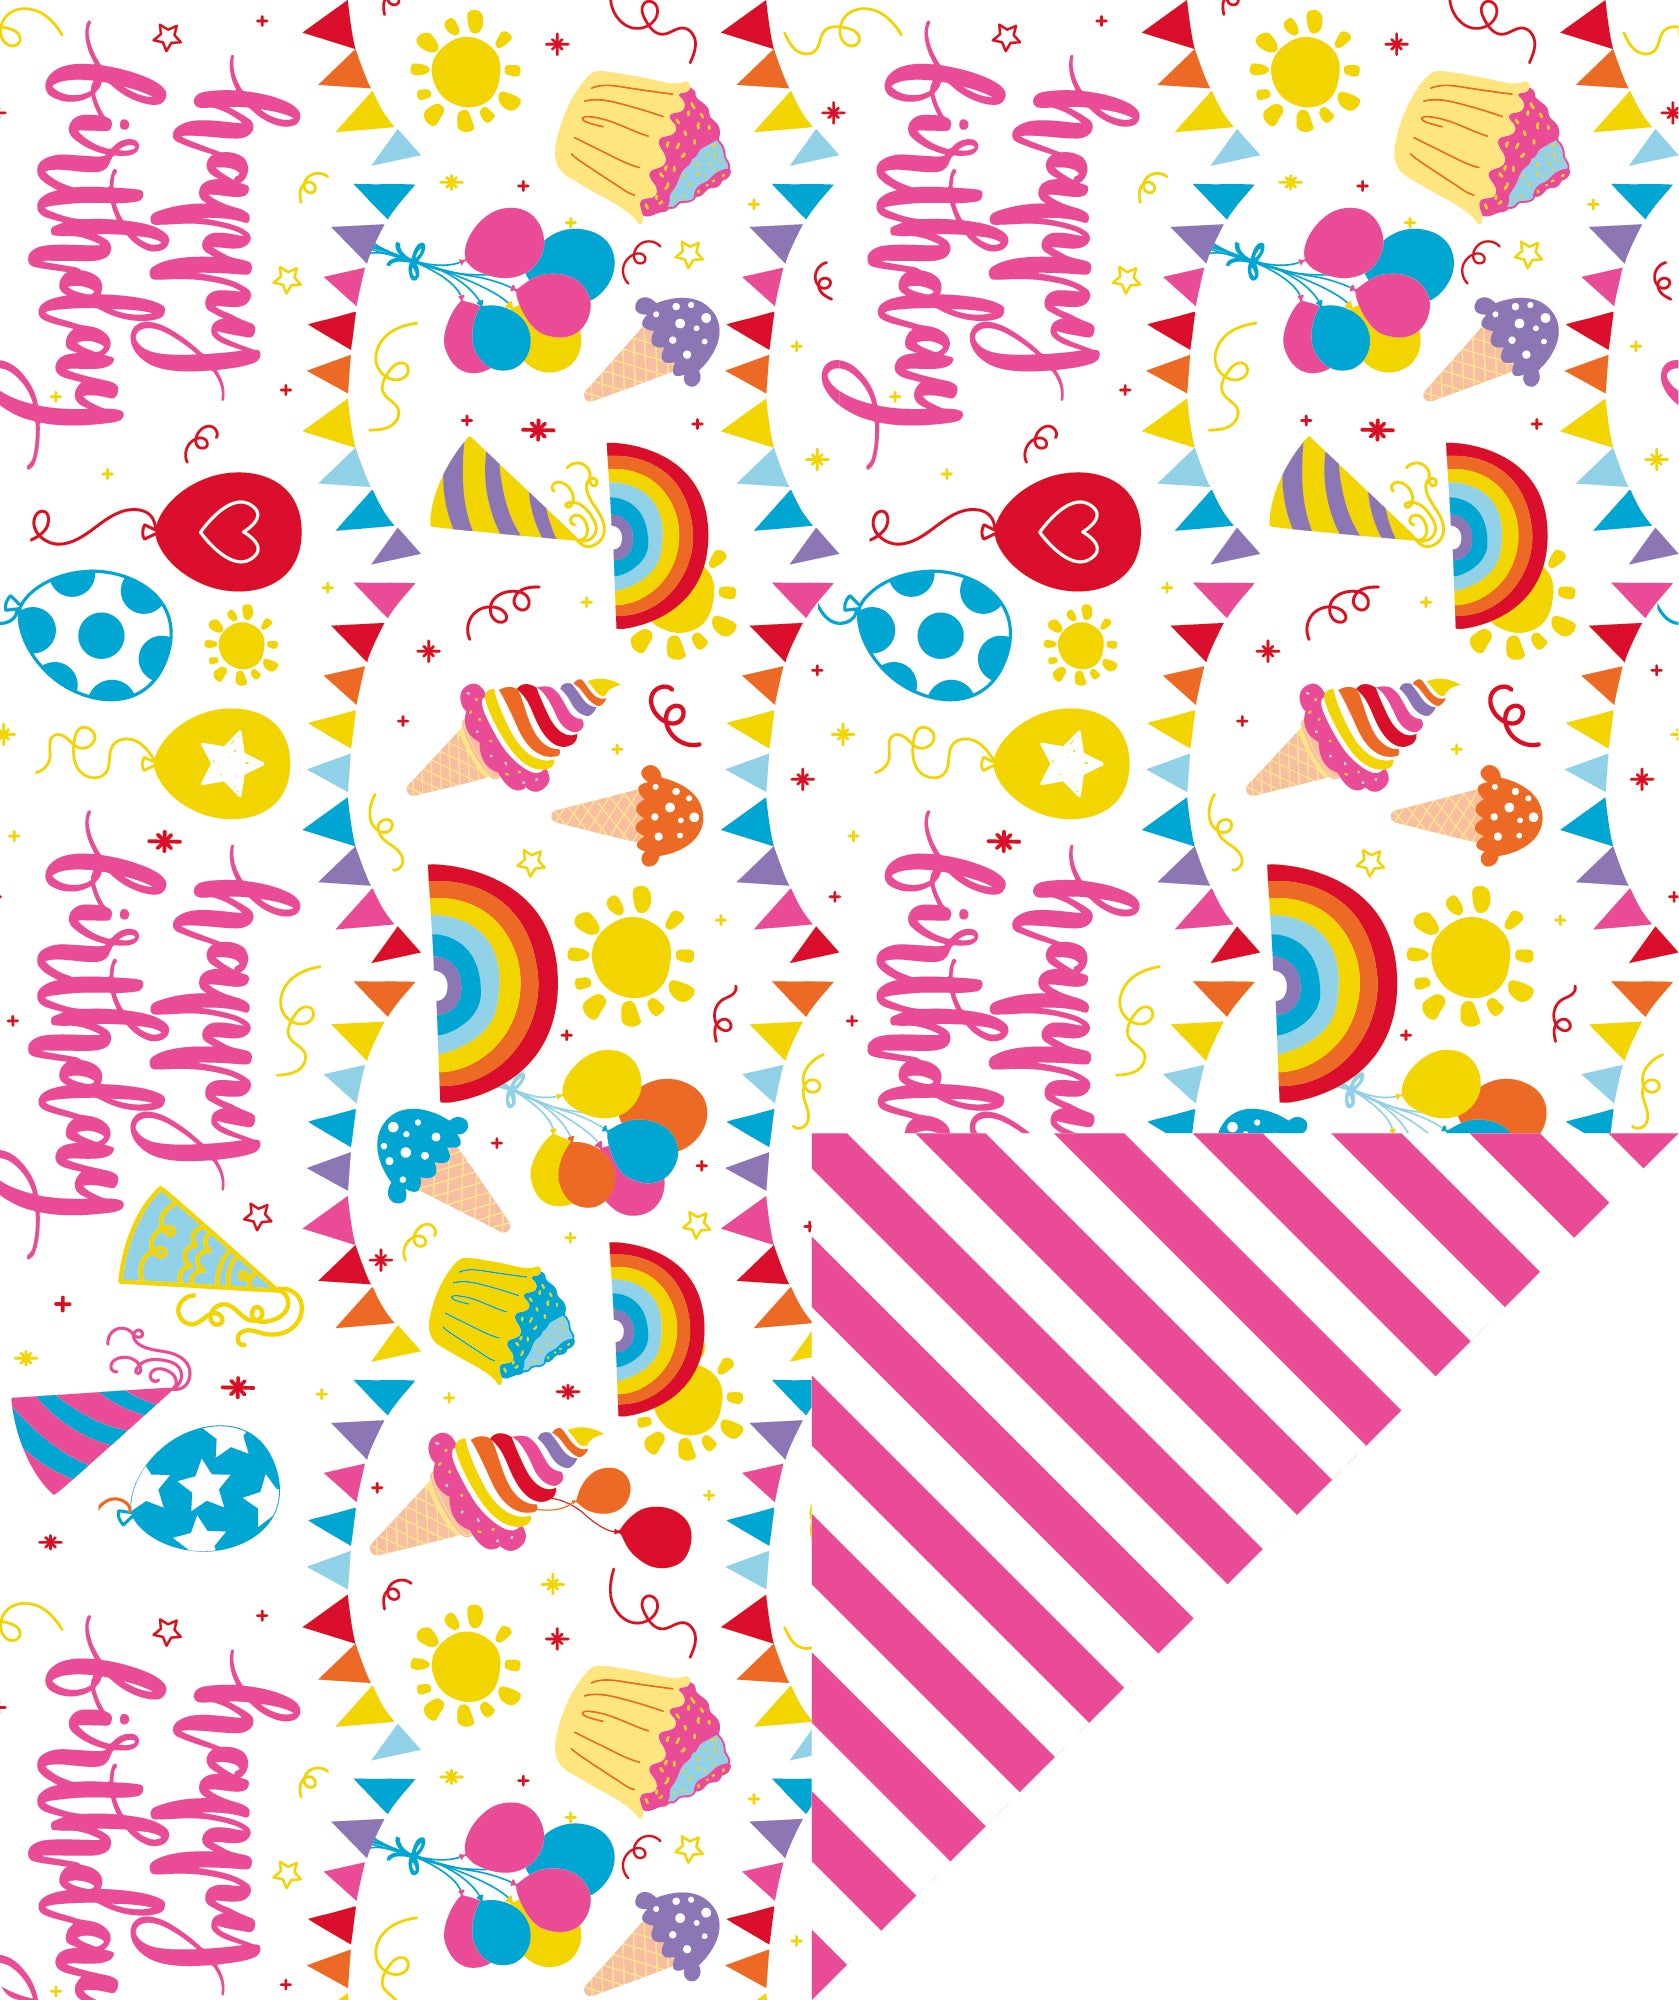 Birthday Party Wrapping Paper with Hot Pink Polka Dot Jumbo Roll Wholesale Wrapaholic